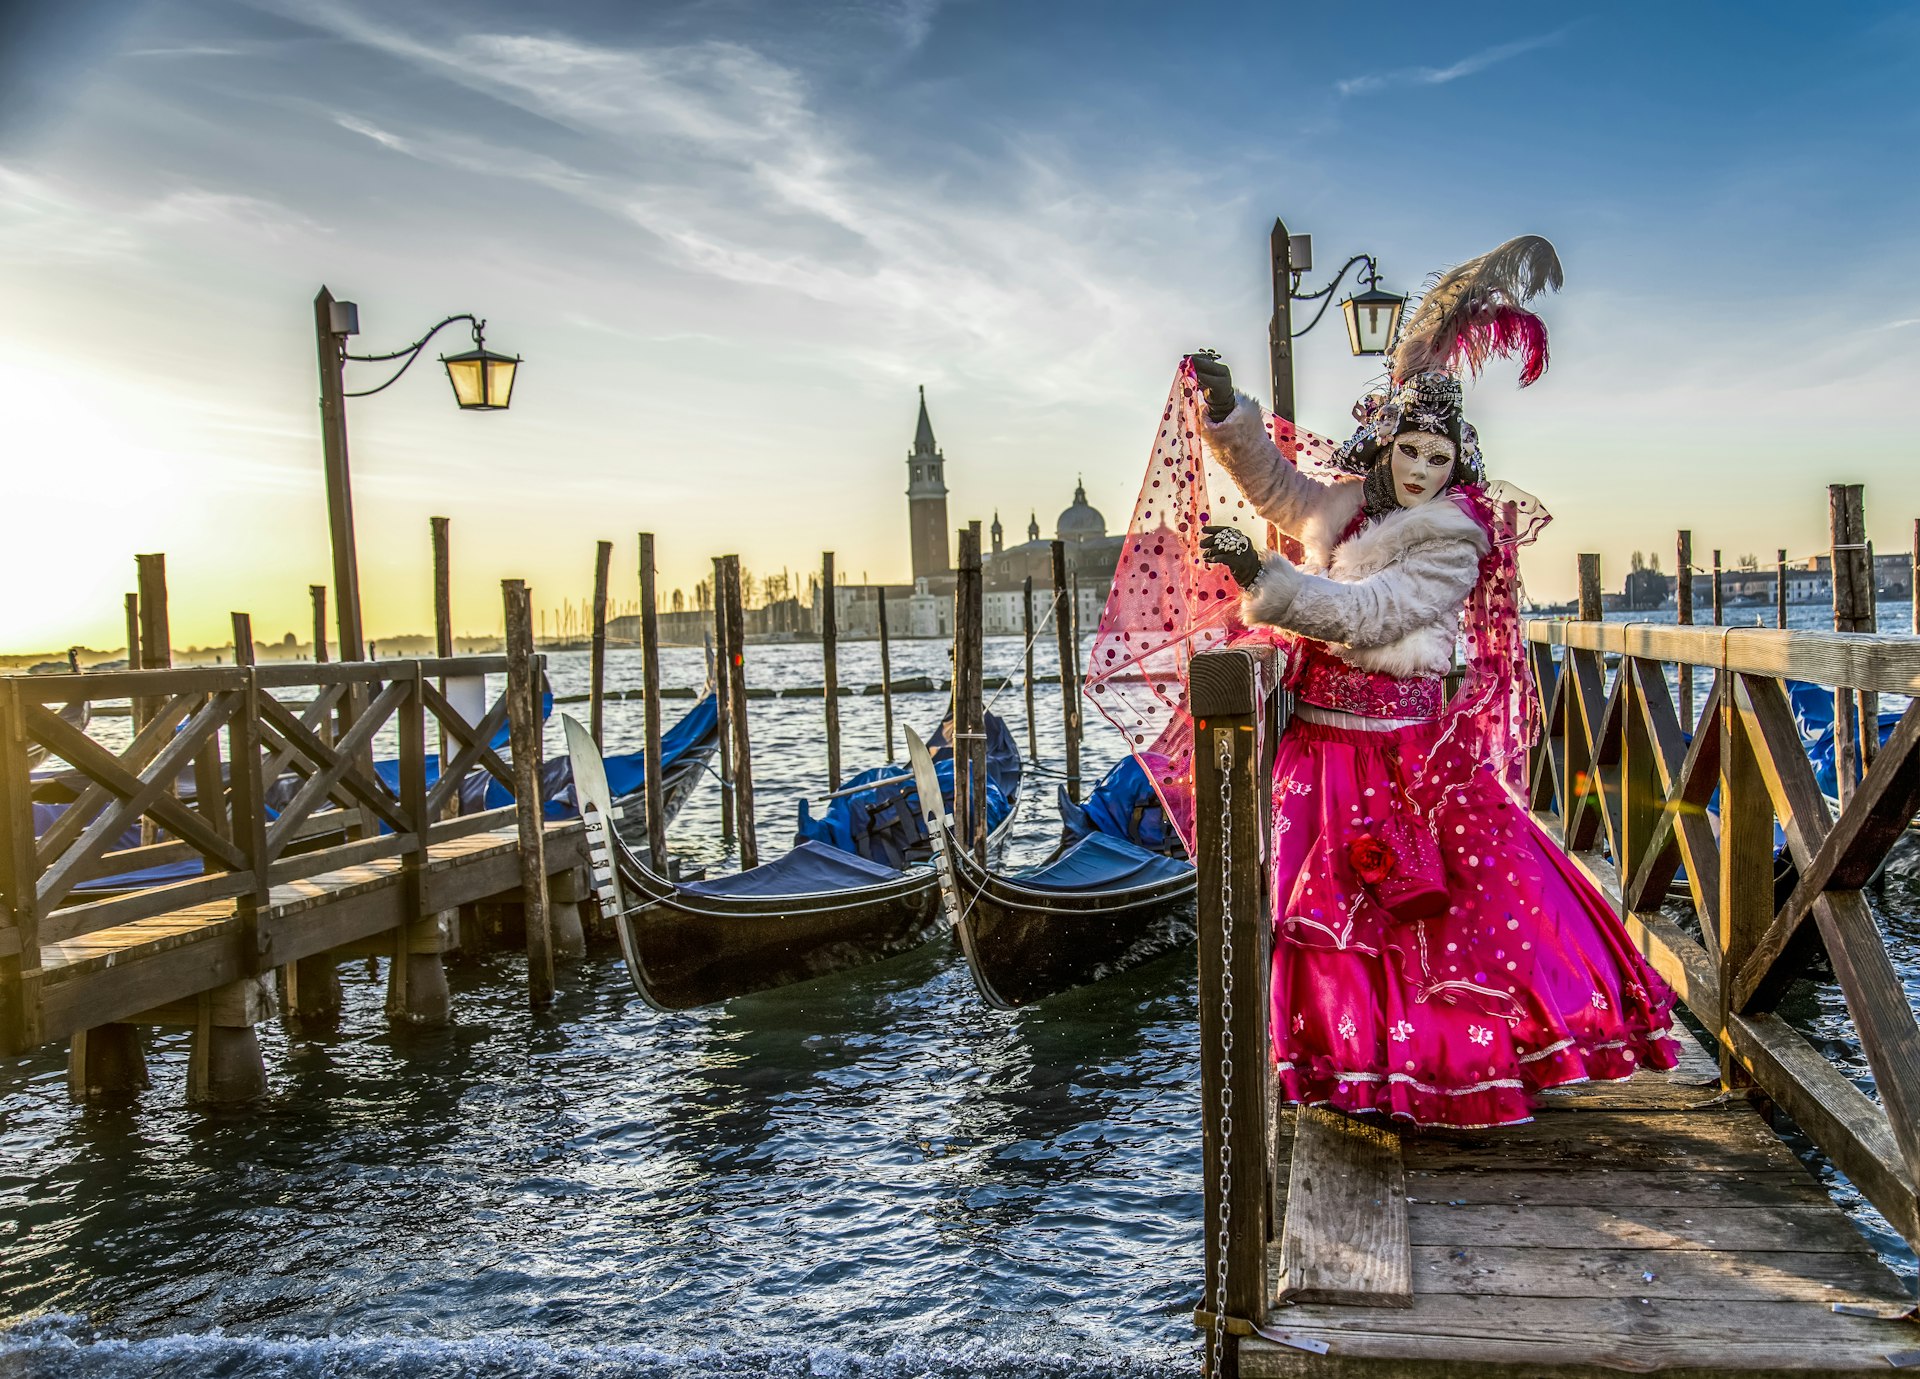 A masked person in a grand costume poses in front of gondolers docked at the side of a canal in Venice